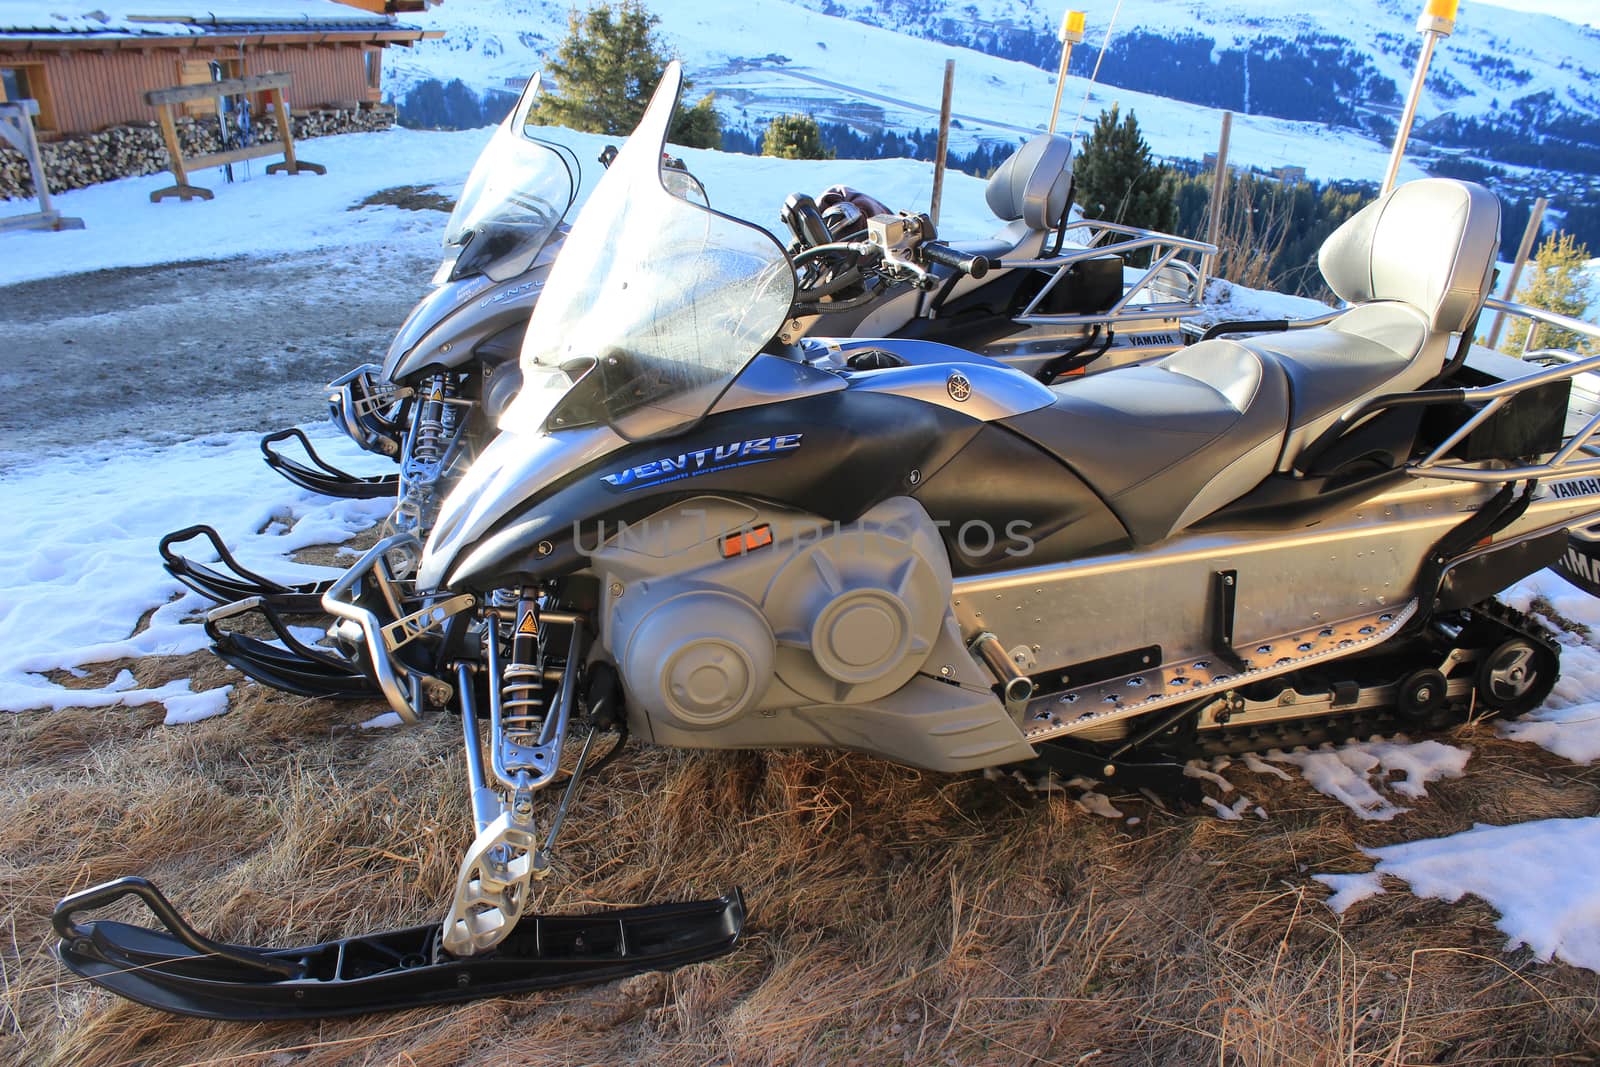 COURCHEVEL - DEC 20 : Venture Multi Purpose, Yamaha Snowmobile Used By Emergency Services at ski resort located in the commune of Saint-Bon-Tarentaise in the French Alps on December 20, 2015 in Courchevel, France